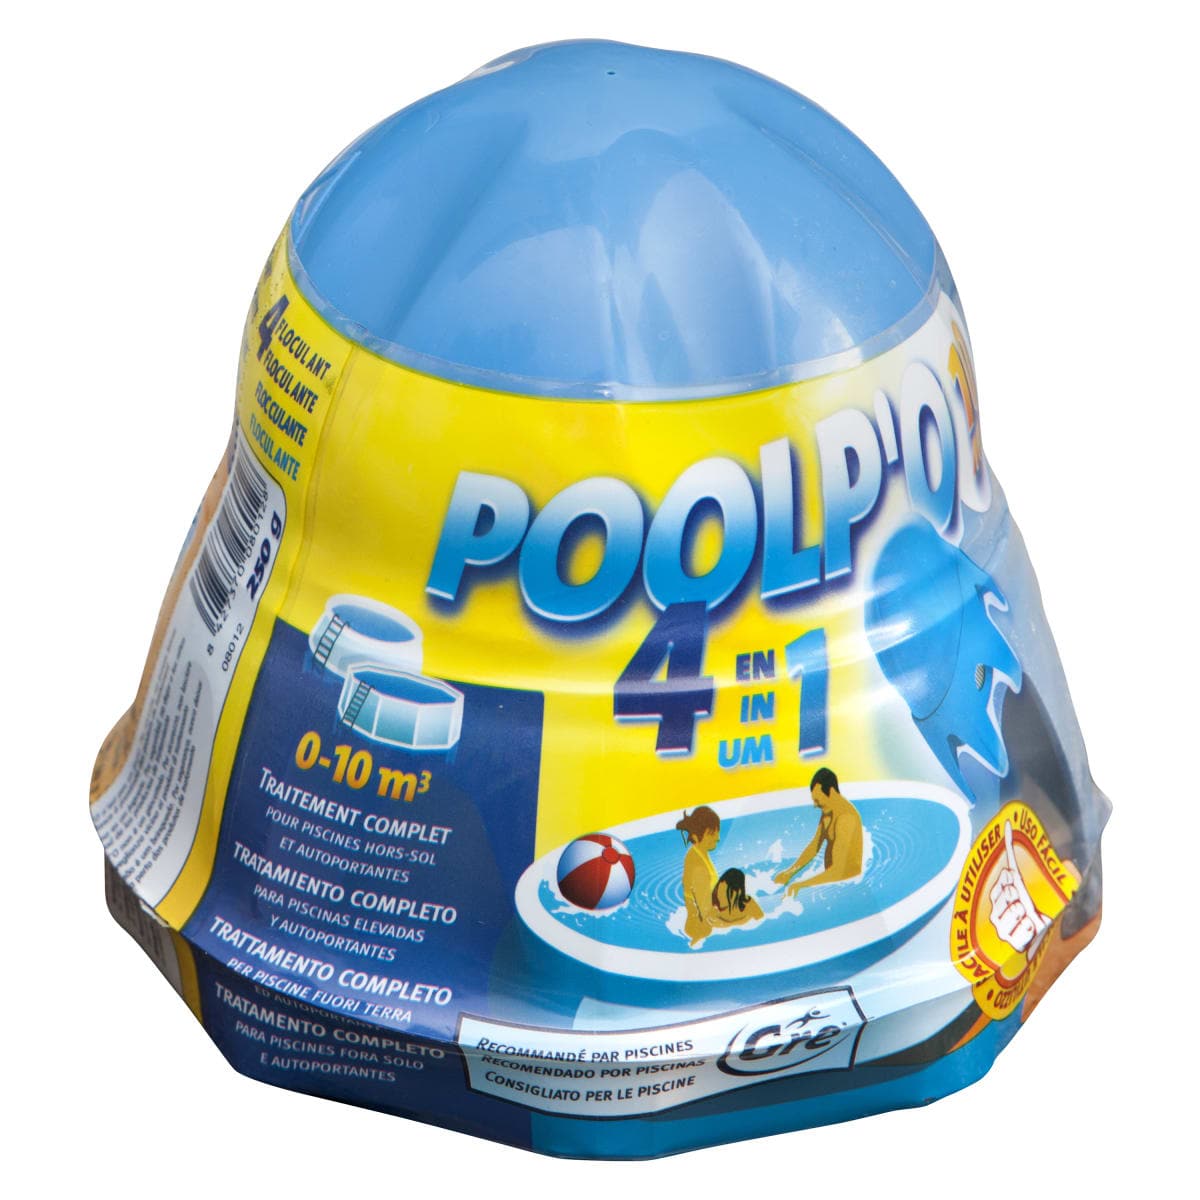 OCTOPUS 4ACTIONS FOR SWIMMING POOLS 250GR - best price from Maltashopper.com BR500710084